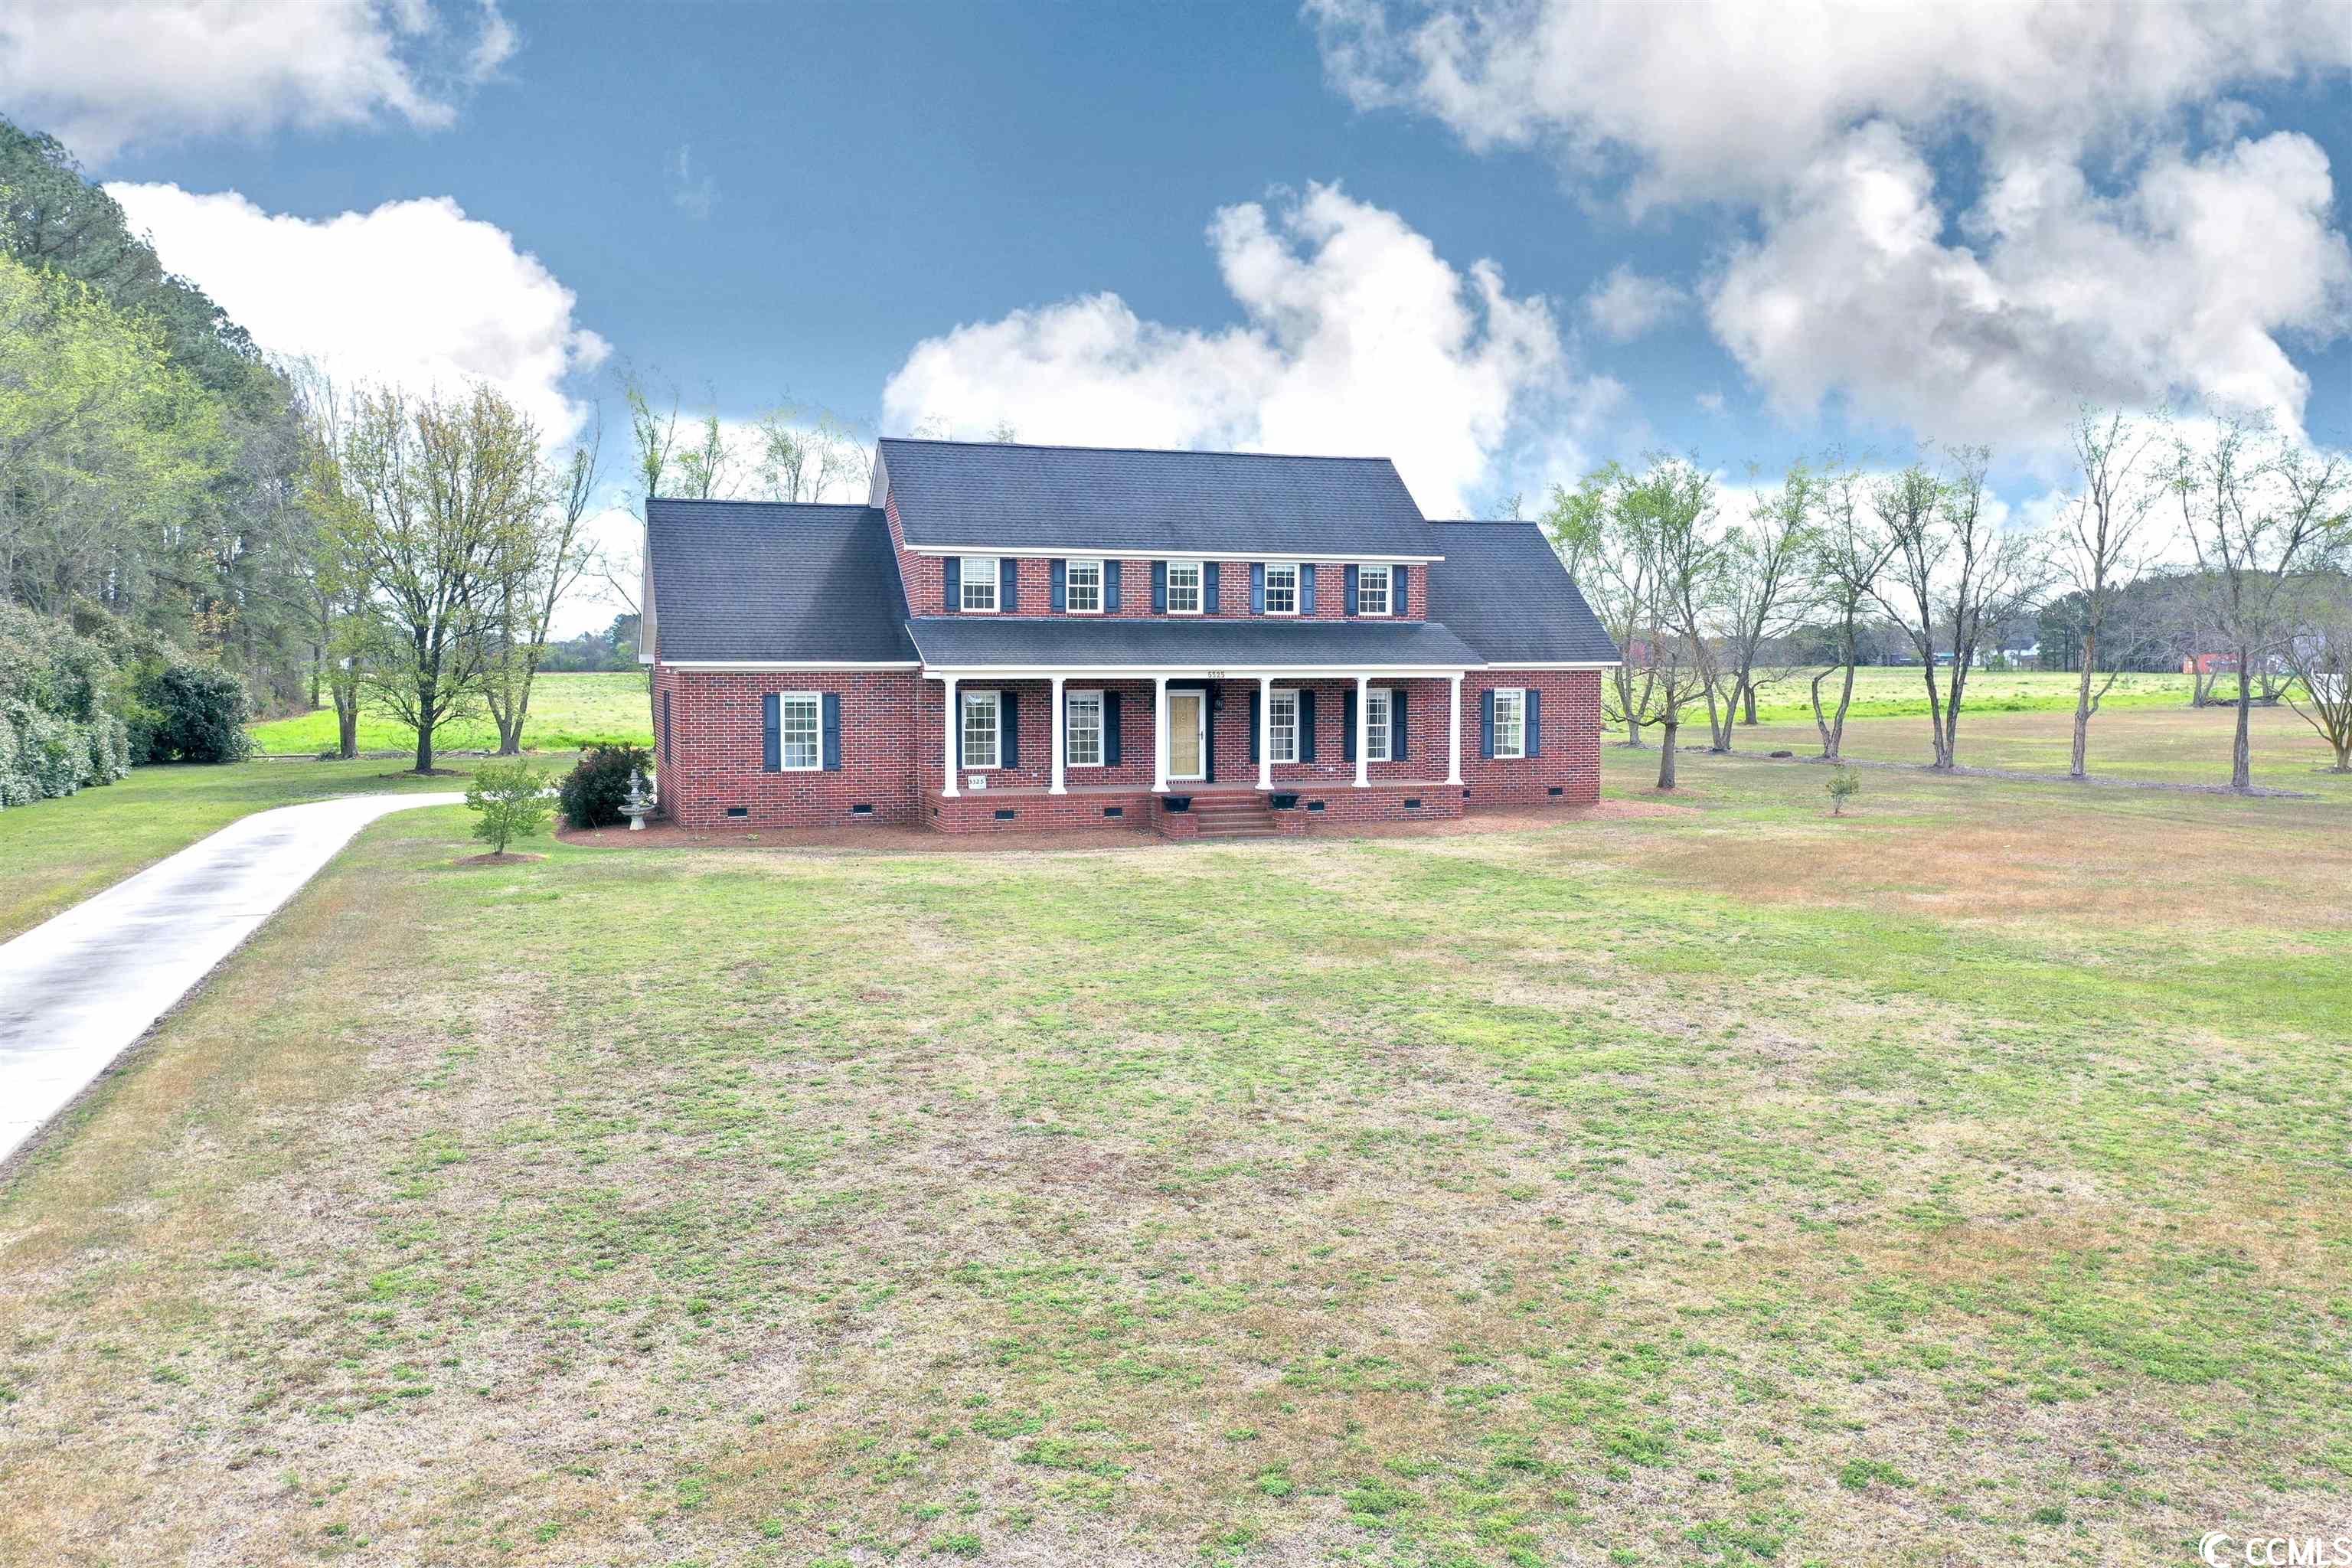 5325 Lake Russell Rd. Mullins, SC 29574